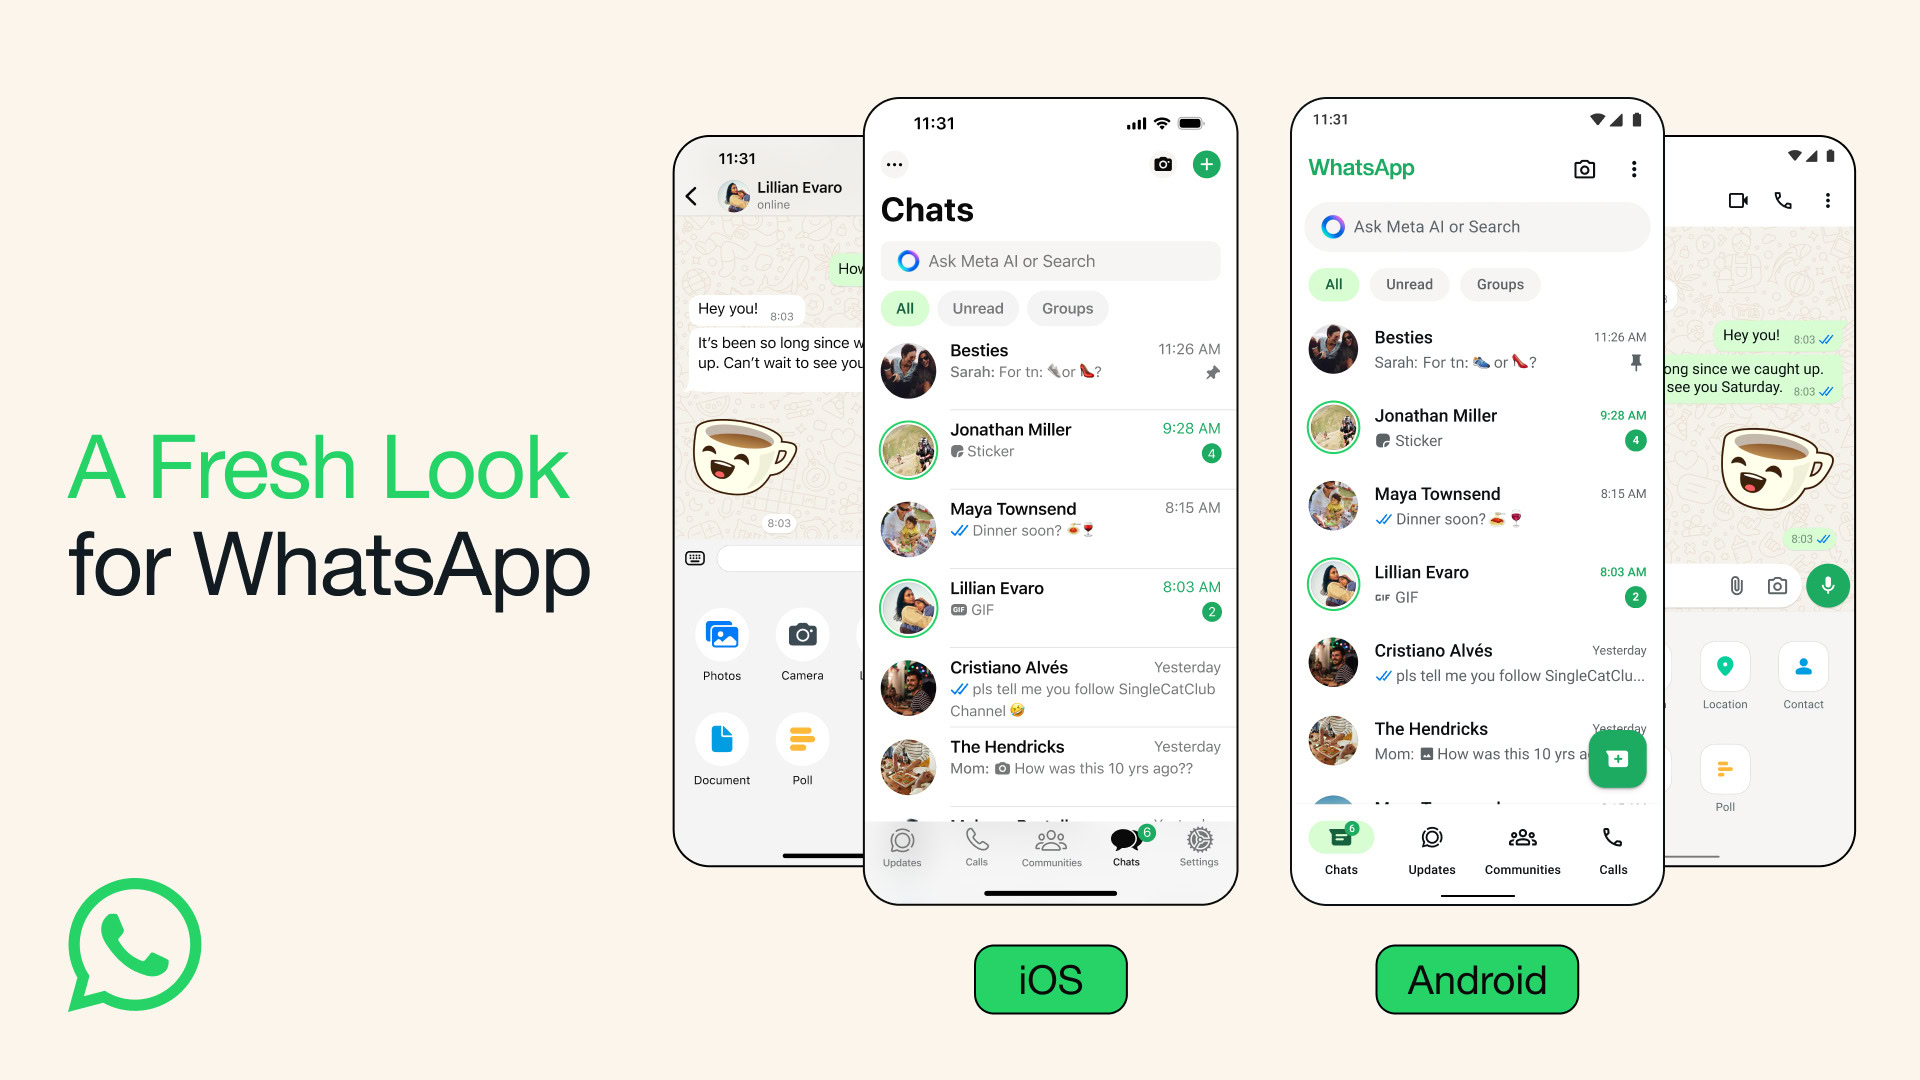 WhatsApp gets major makeover, introduces new colors, icons, and better dark mode